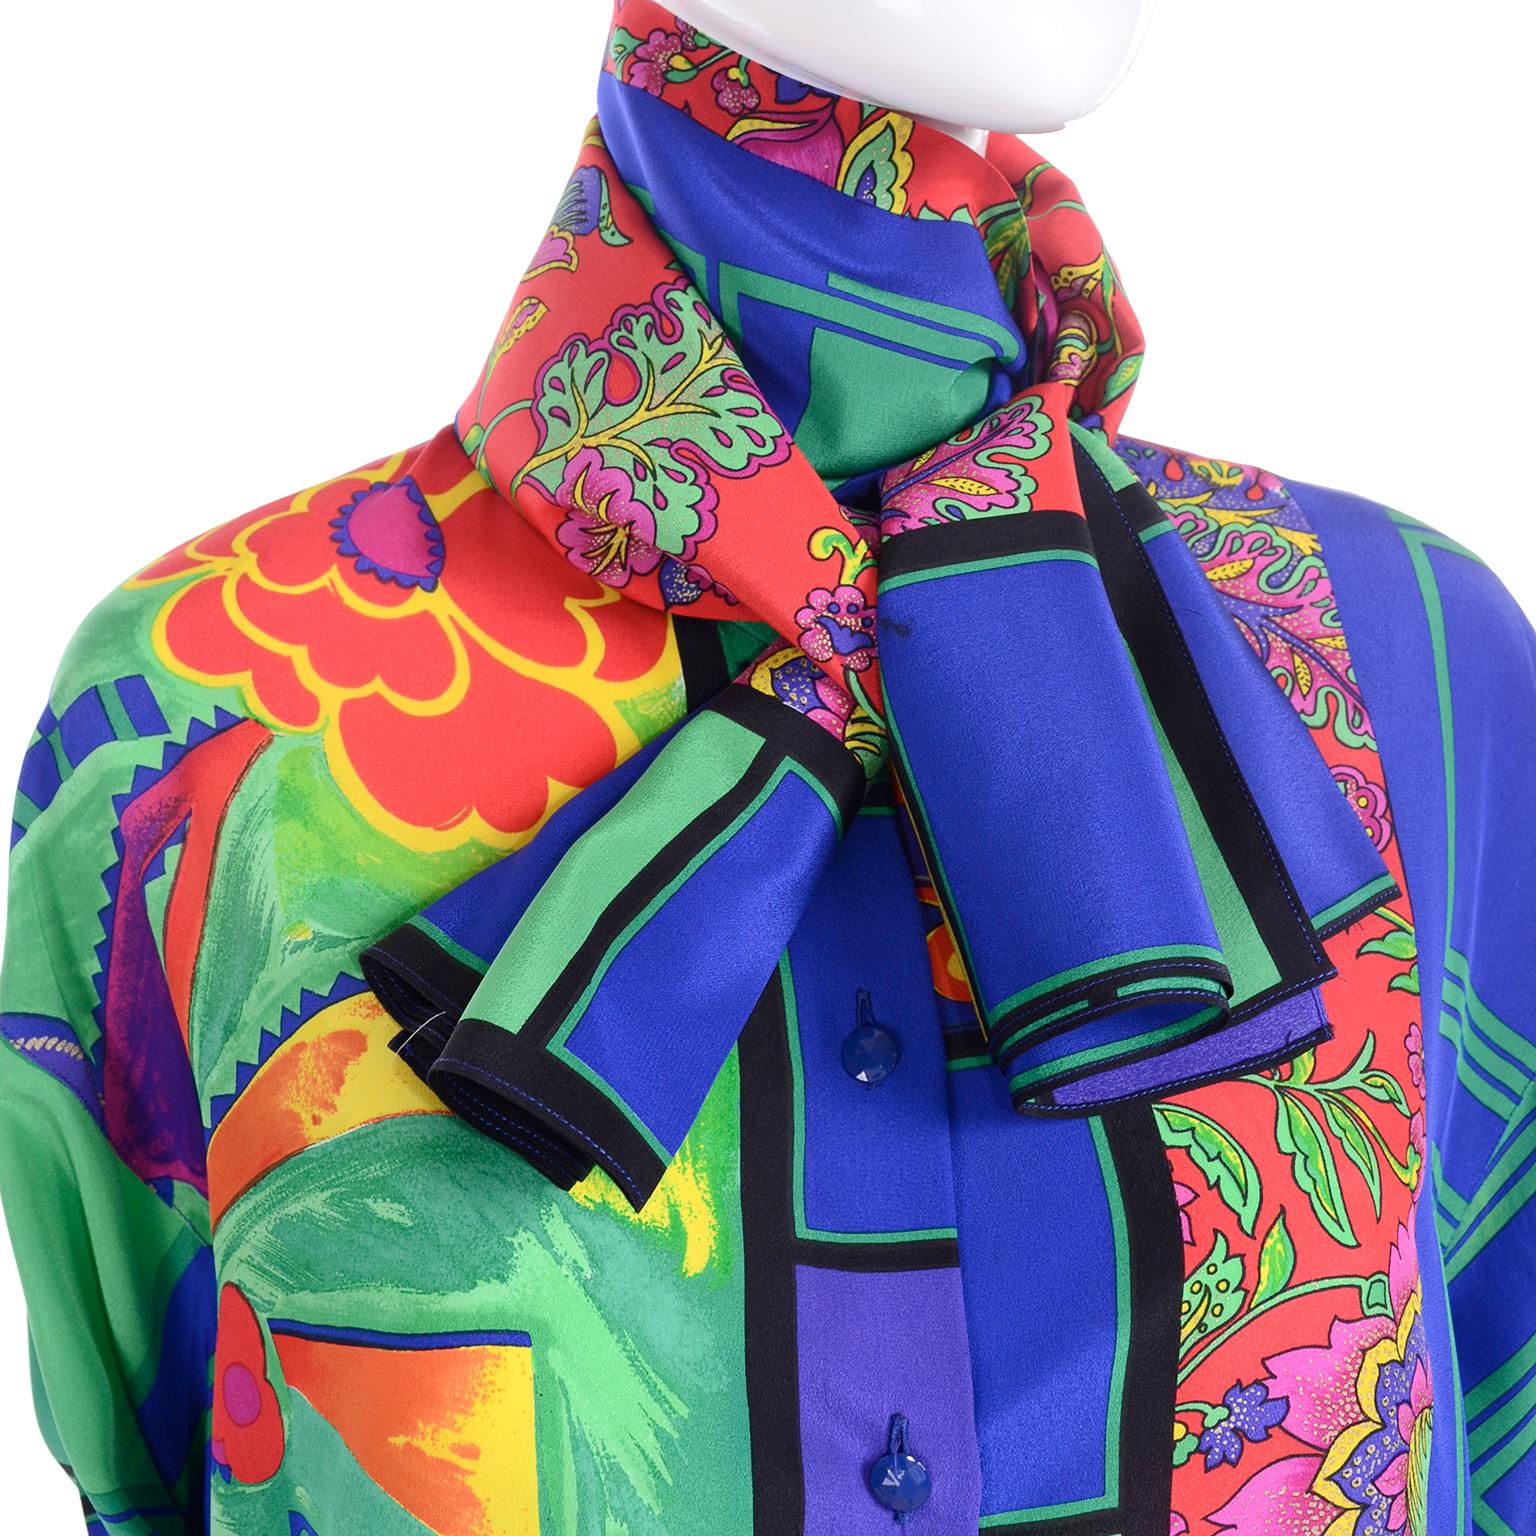 Gianni Versace Early 1990s Bright Colorful Vintage Silk Print Shirt & Huge Scarf For Sale 3